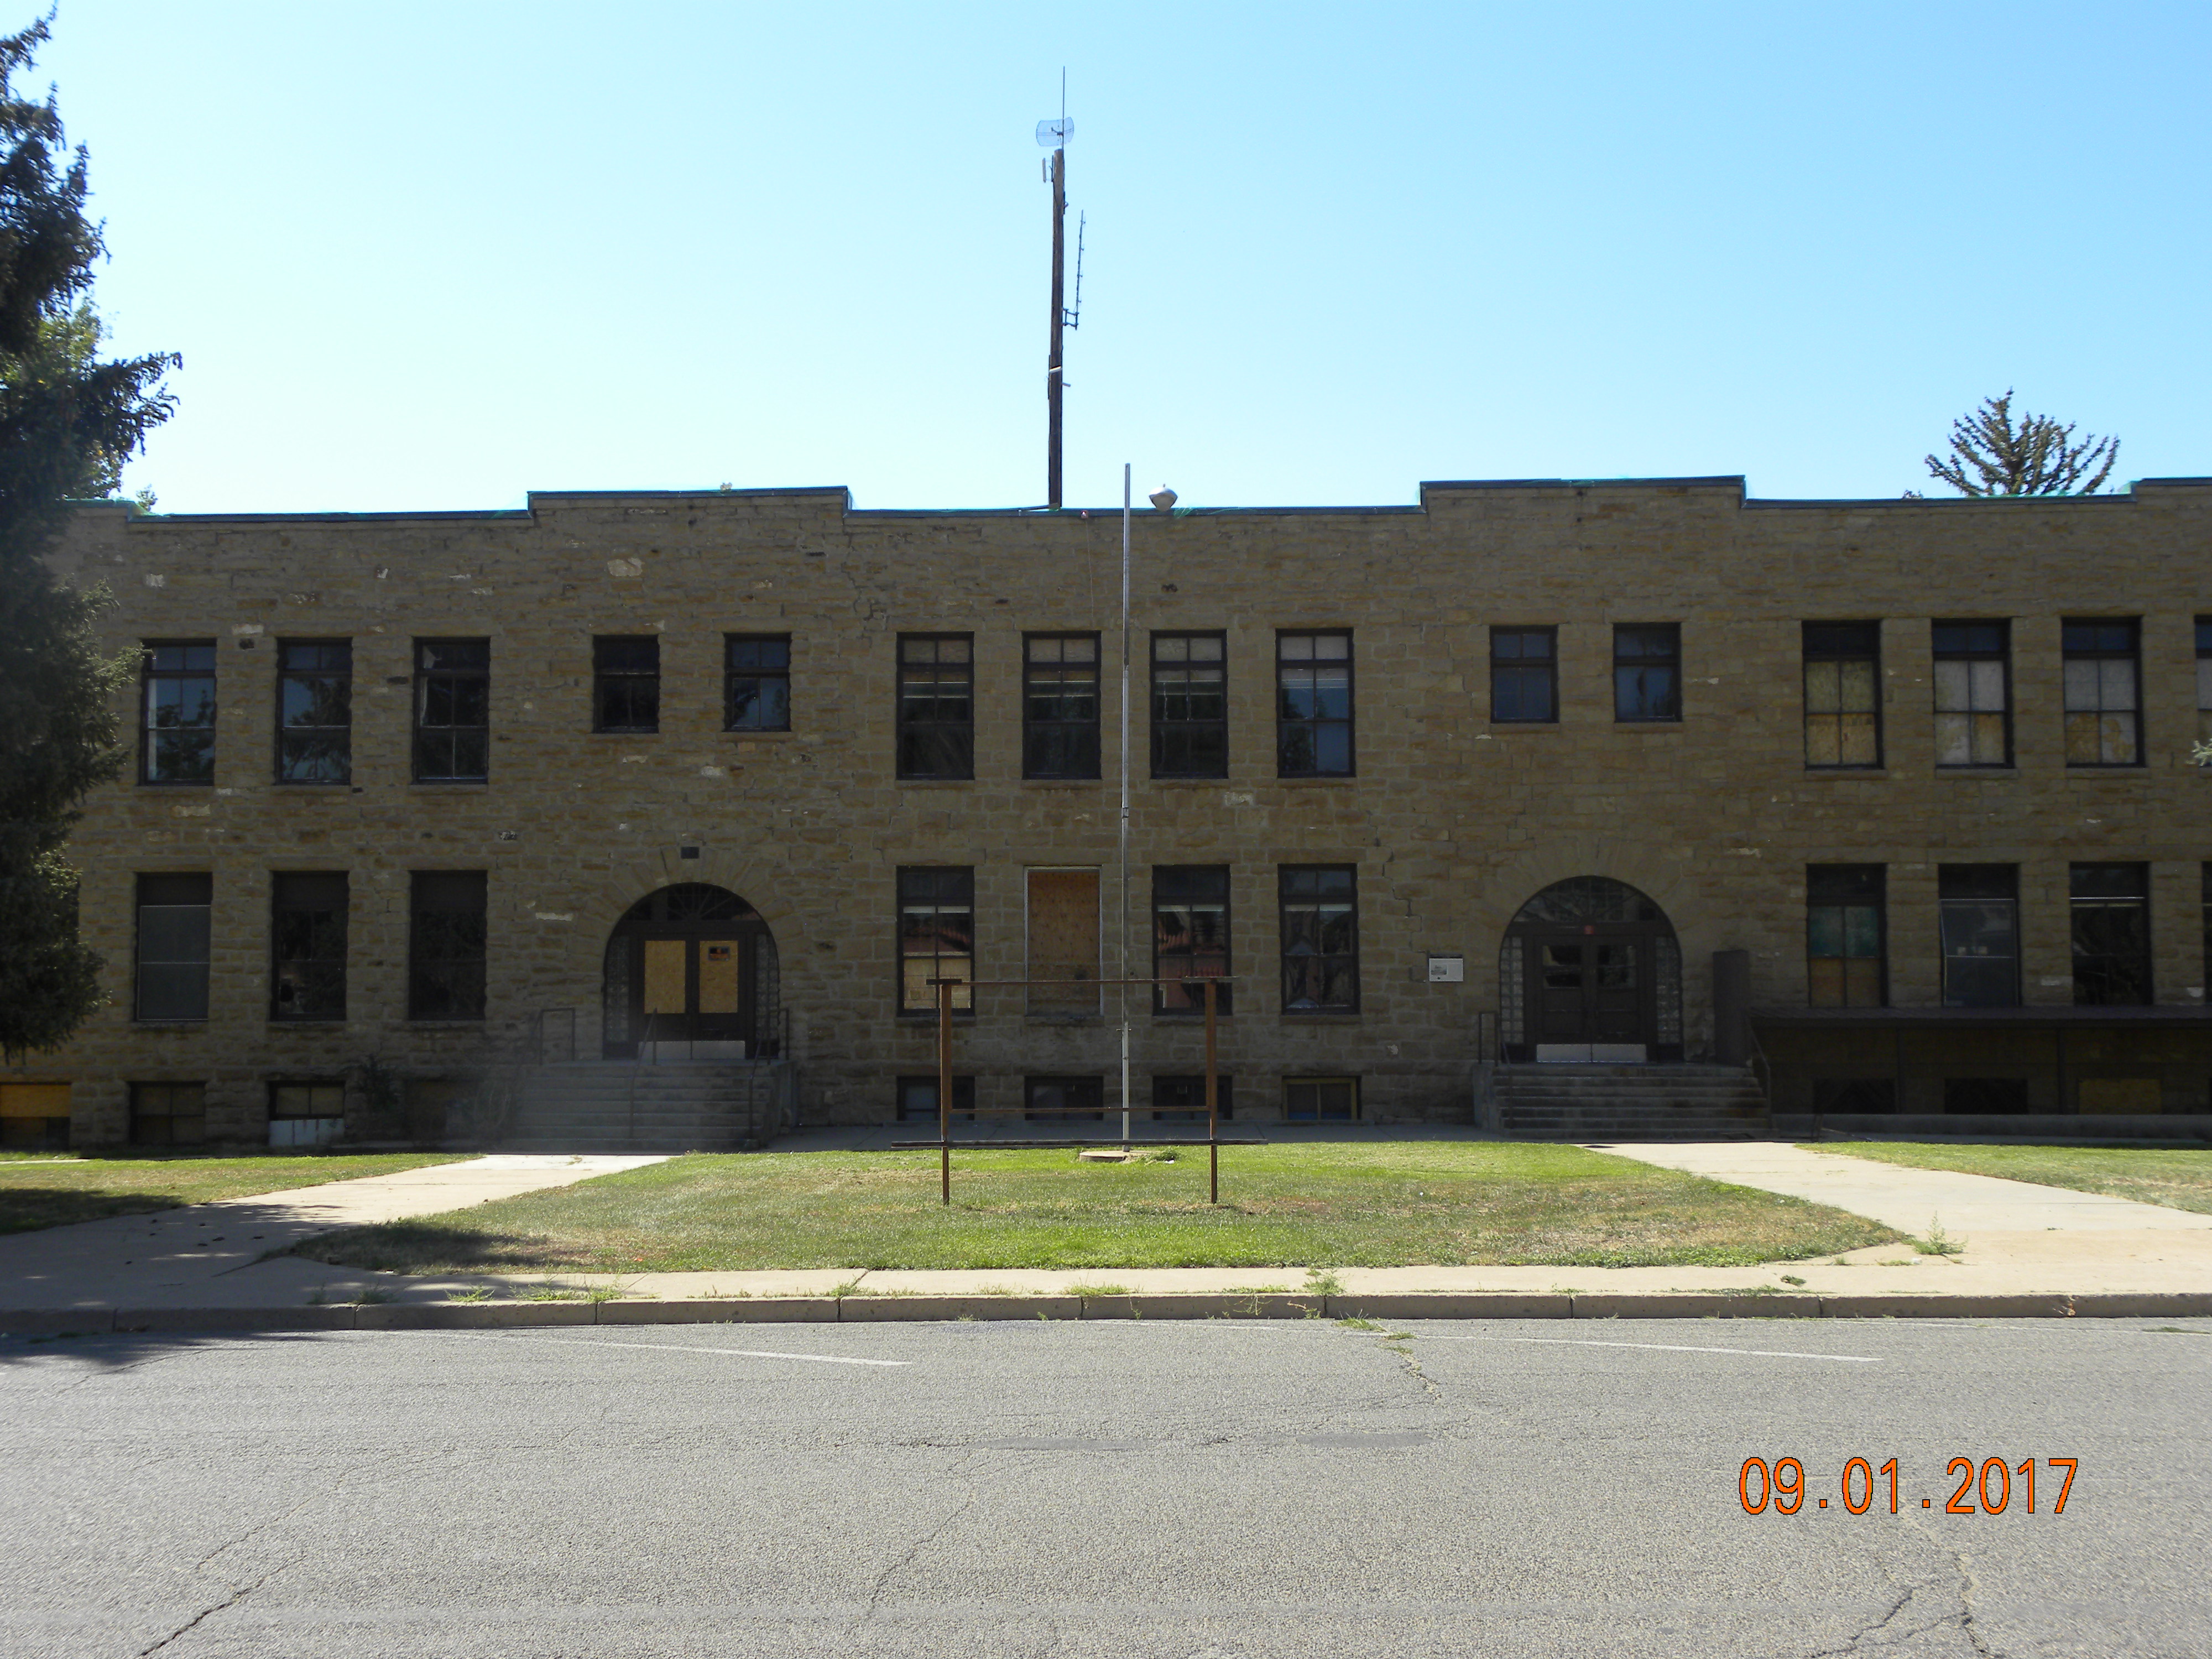 Calkins School, a two-story stone school building with two arched entryways.